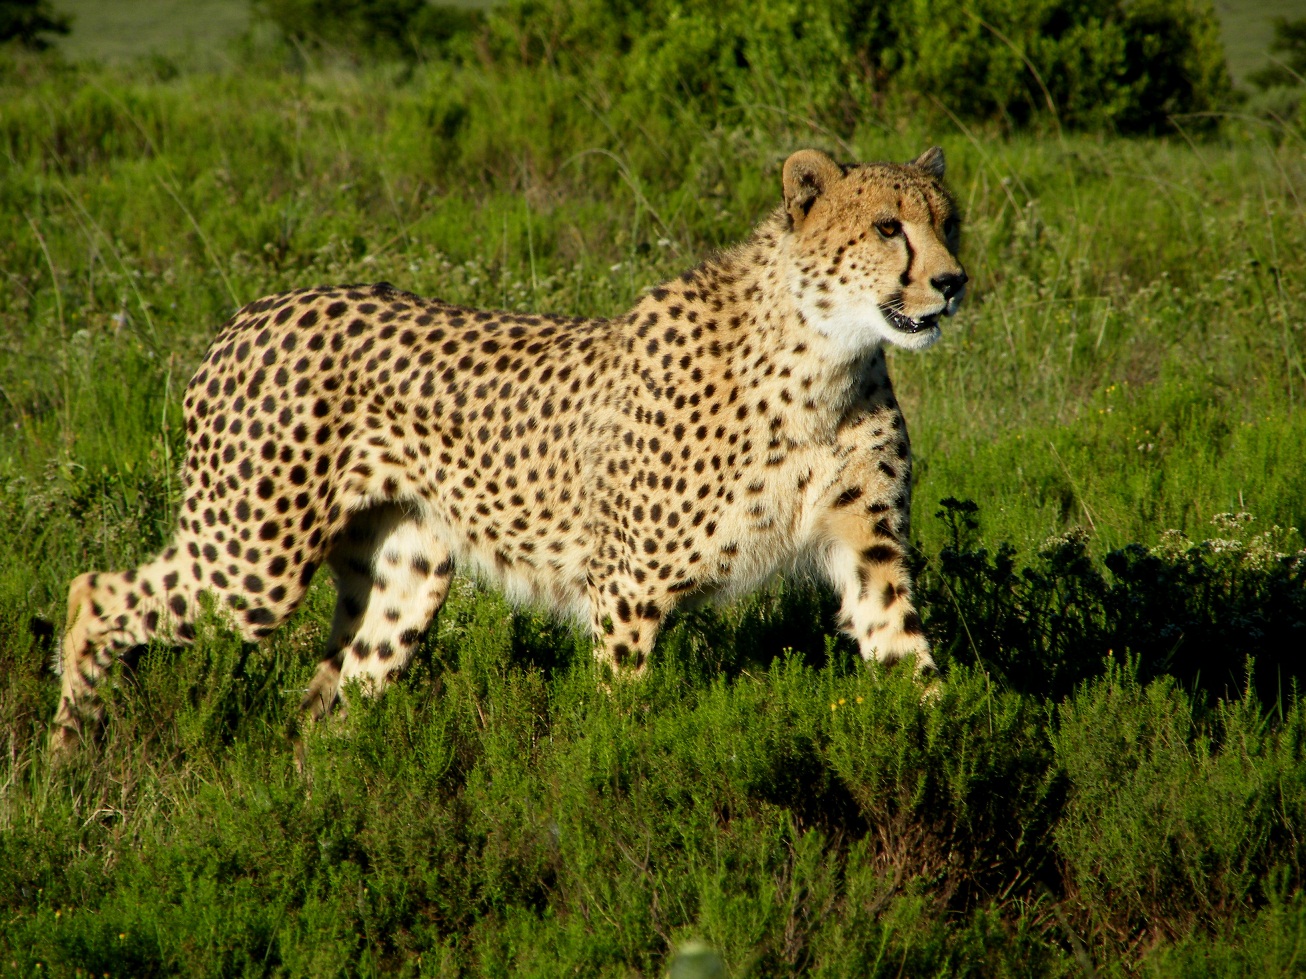 A majestic cheetah watches on, potentially scouting for food